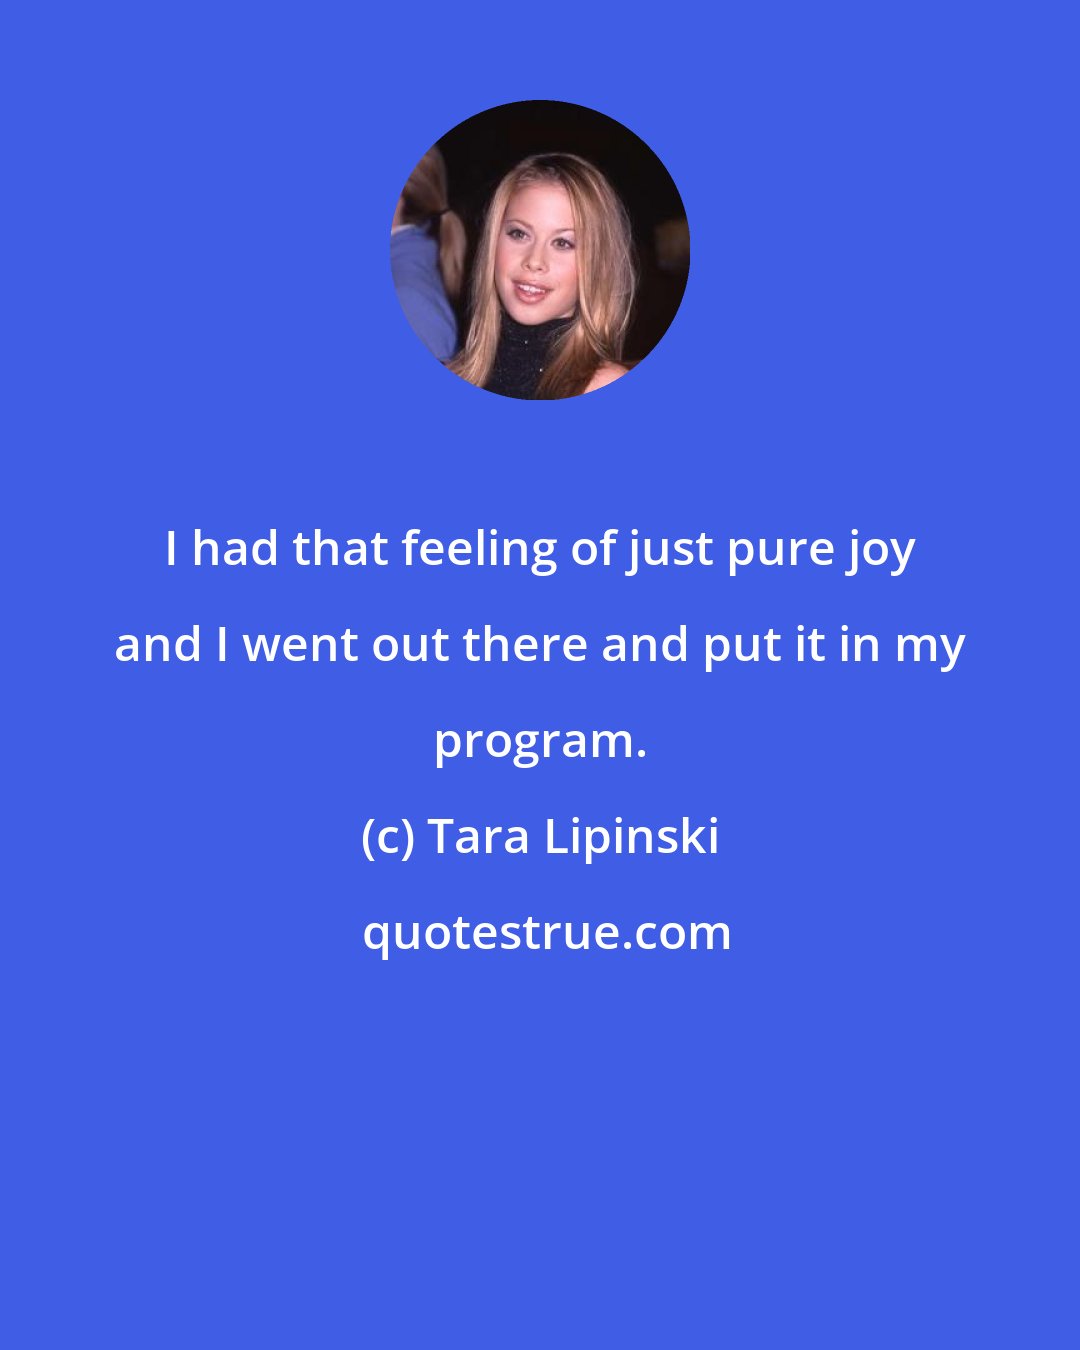 Tara Lipinski: I had that feeling of just pure joy and I went out there and put it in my program.